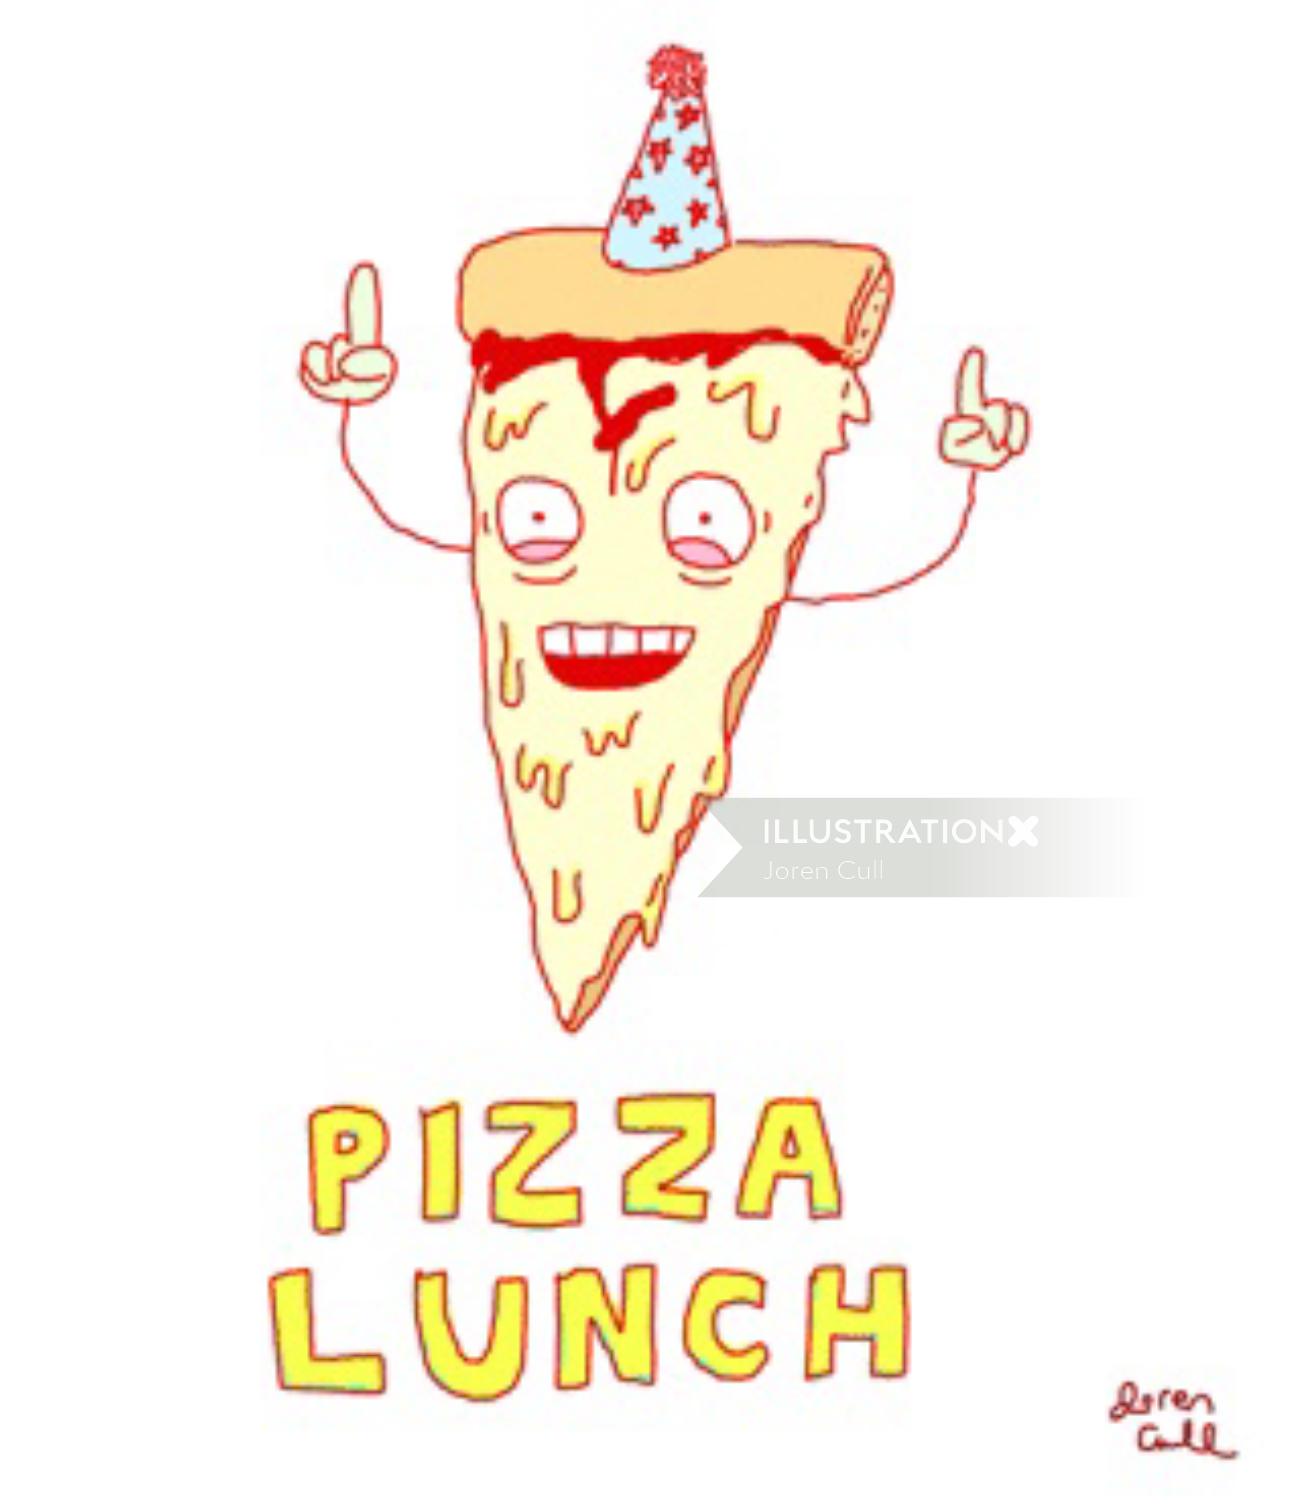 Gif animation of pizza lunch 